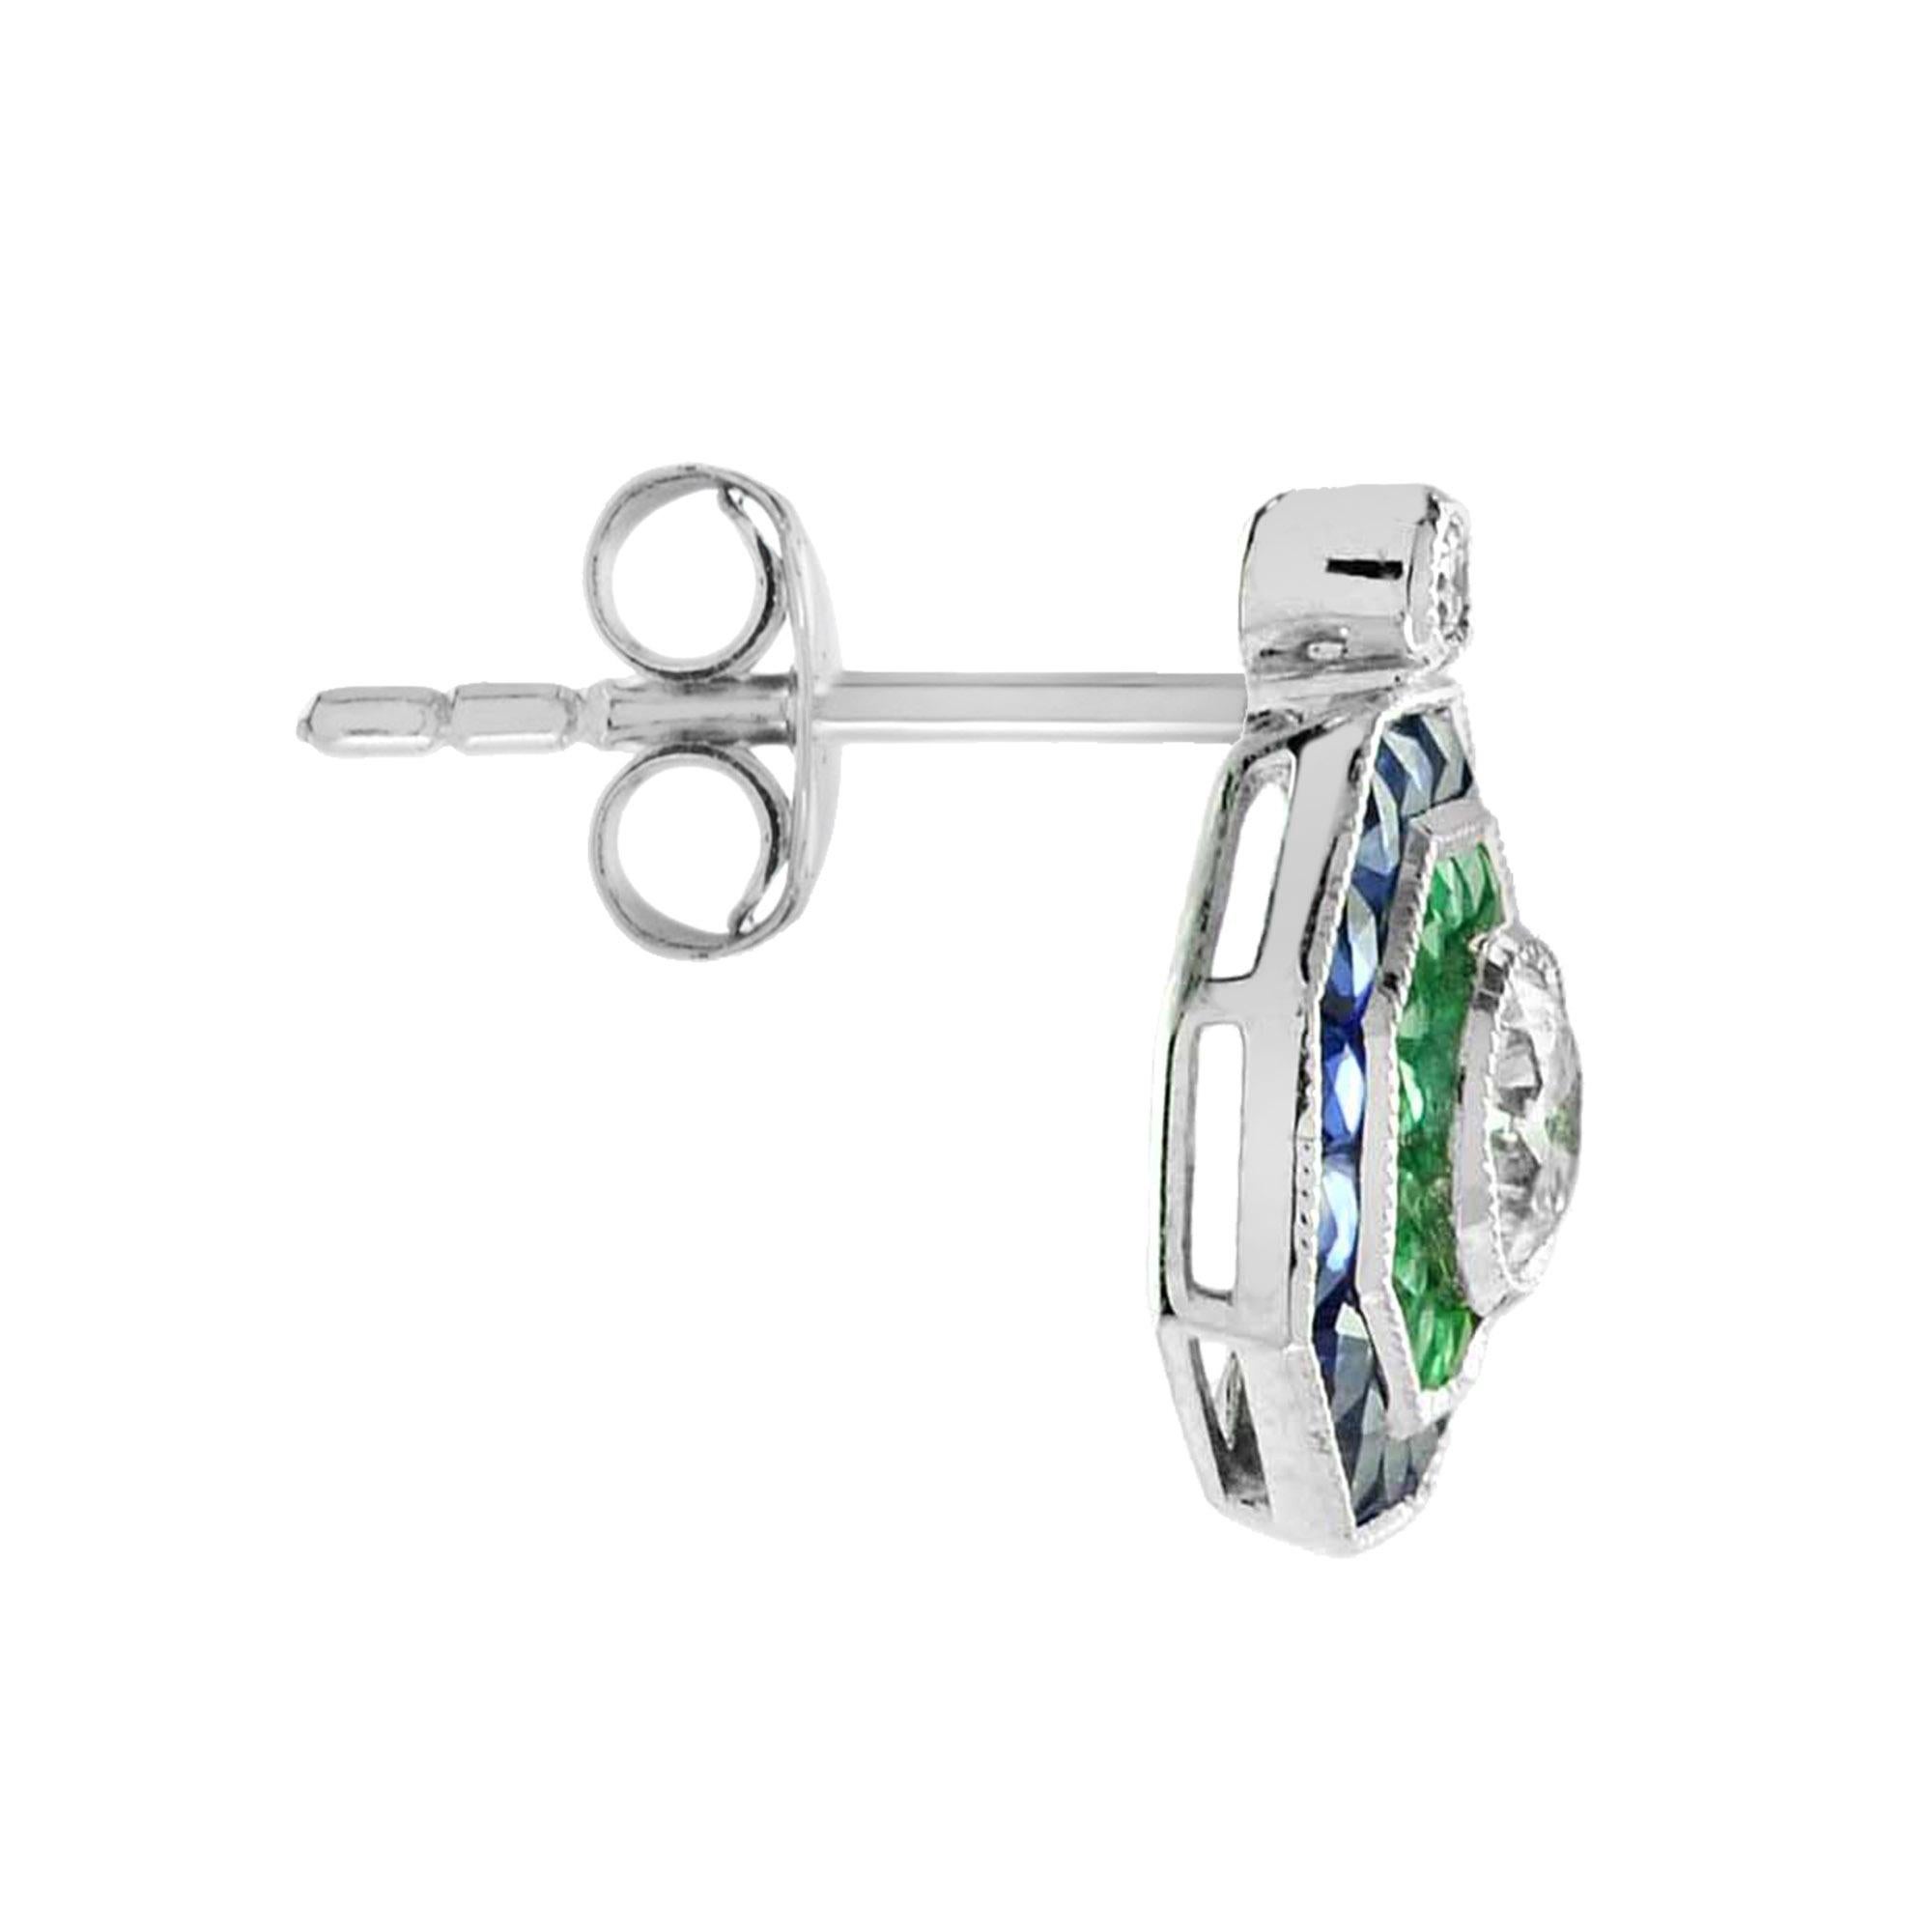 A glamorous Art Deco inspired target cluster earrings bezel set with stunning brilliant cut diamonds, framed in an octagonal border of French cut emeralds and further sapphires which case around the edge. 

Information
Style: Art Deco
Metal: 18K